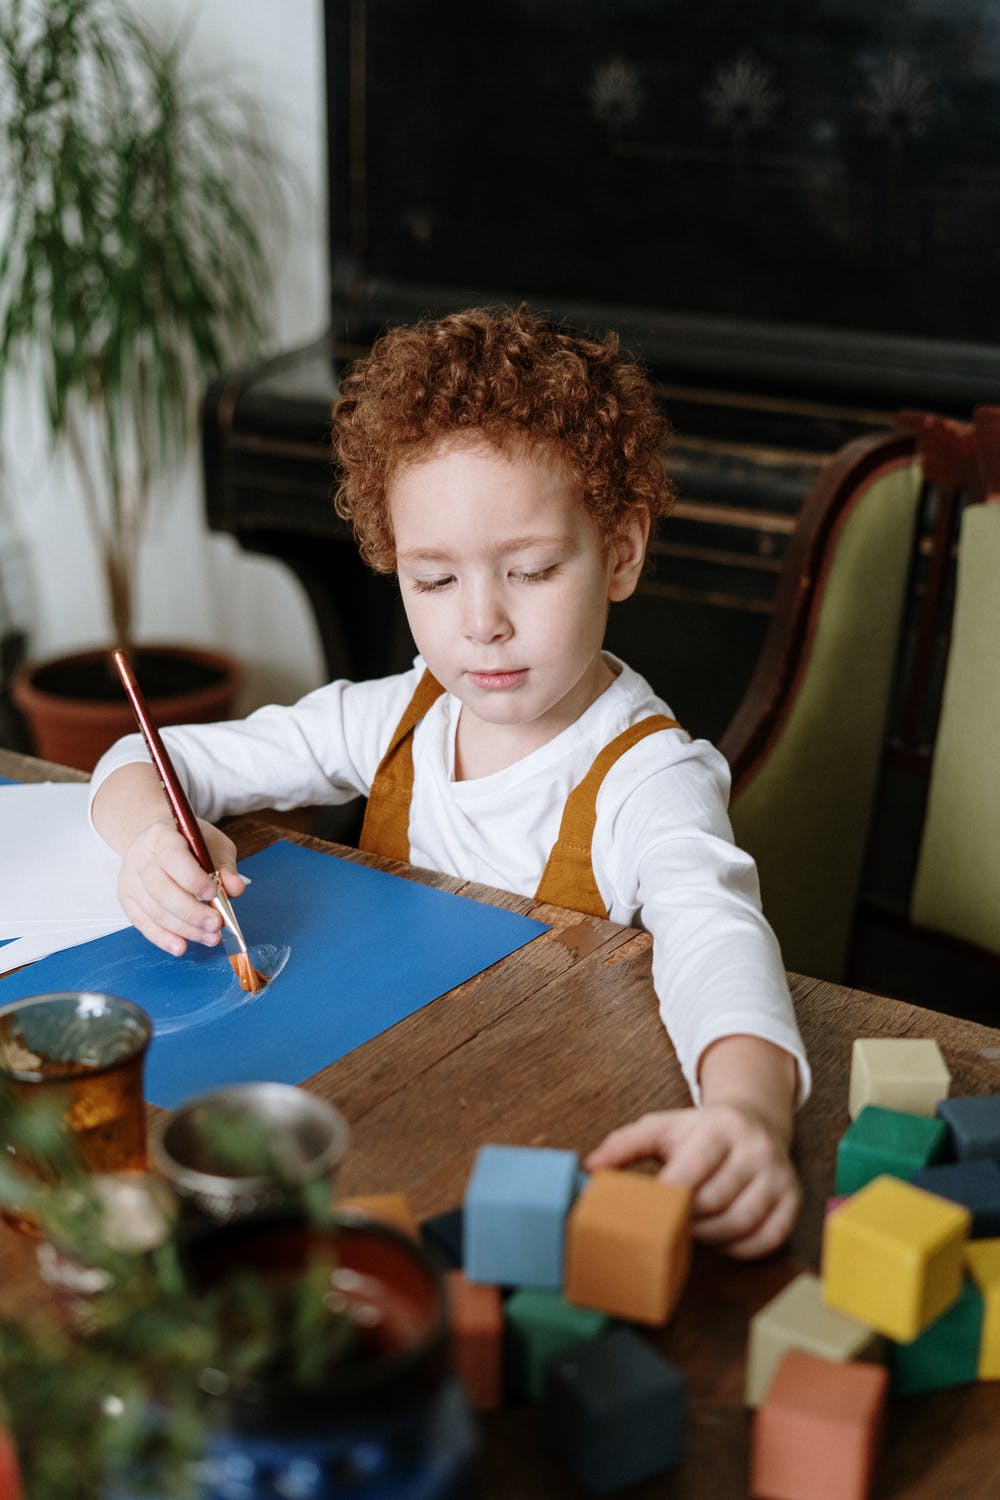 Gail was drawn to one particular boy and his drawings | Source: Pexels